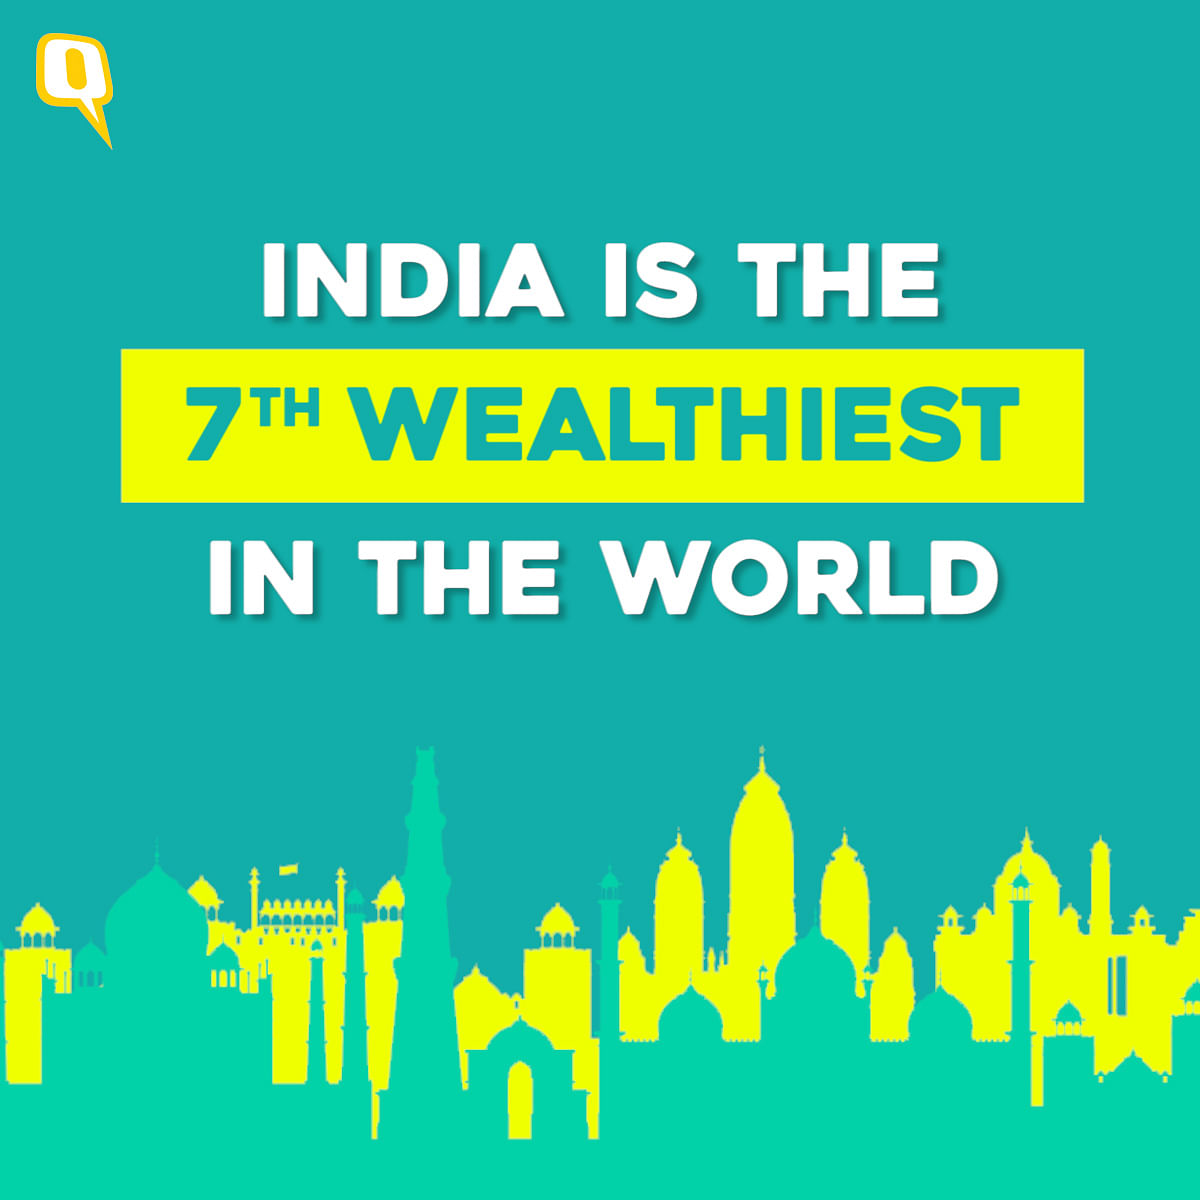 Recent rankings claim India is the seventh wealthiest country, but the poverty figures still remain disturbing.